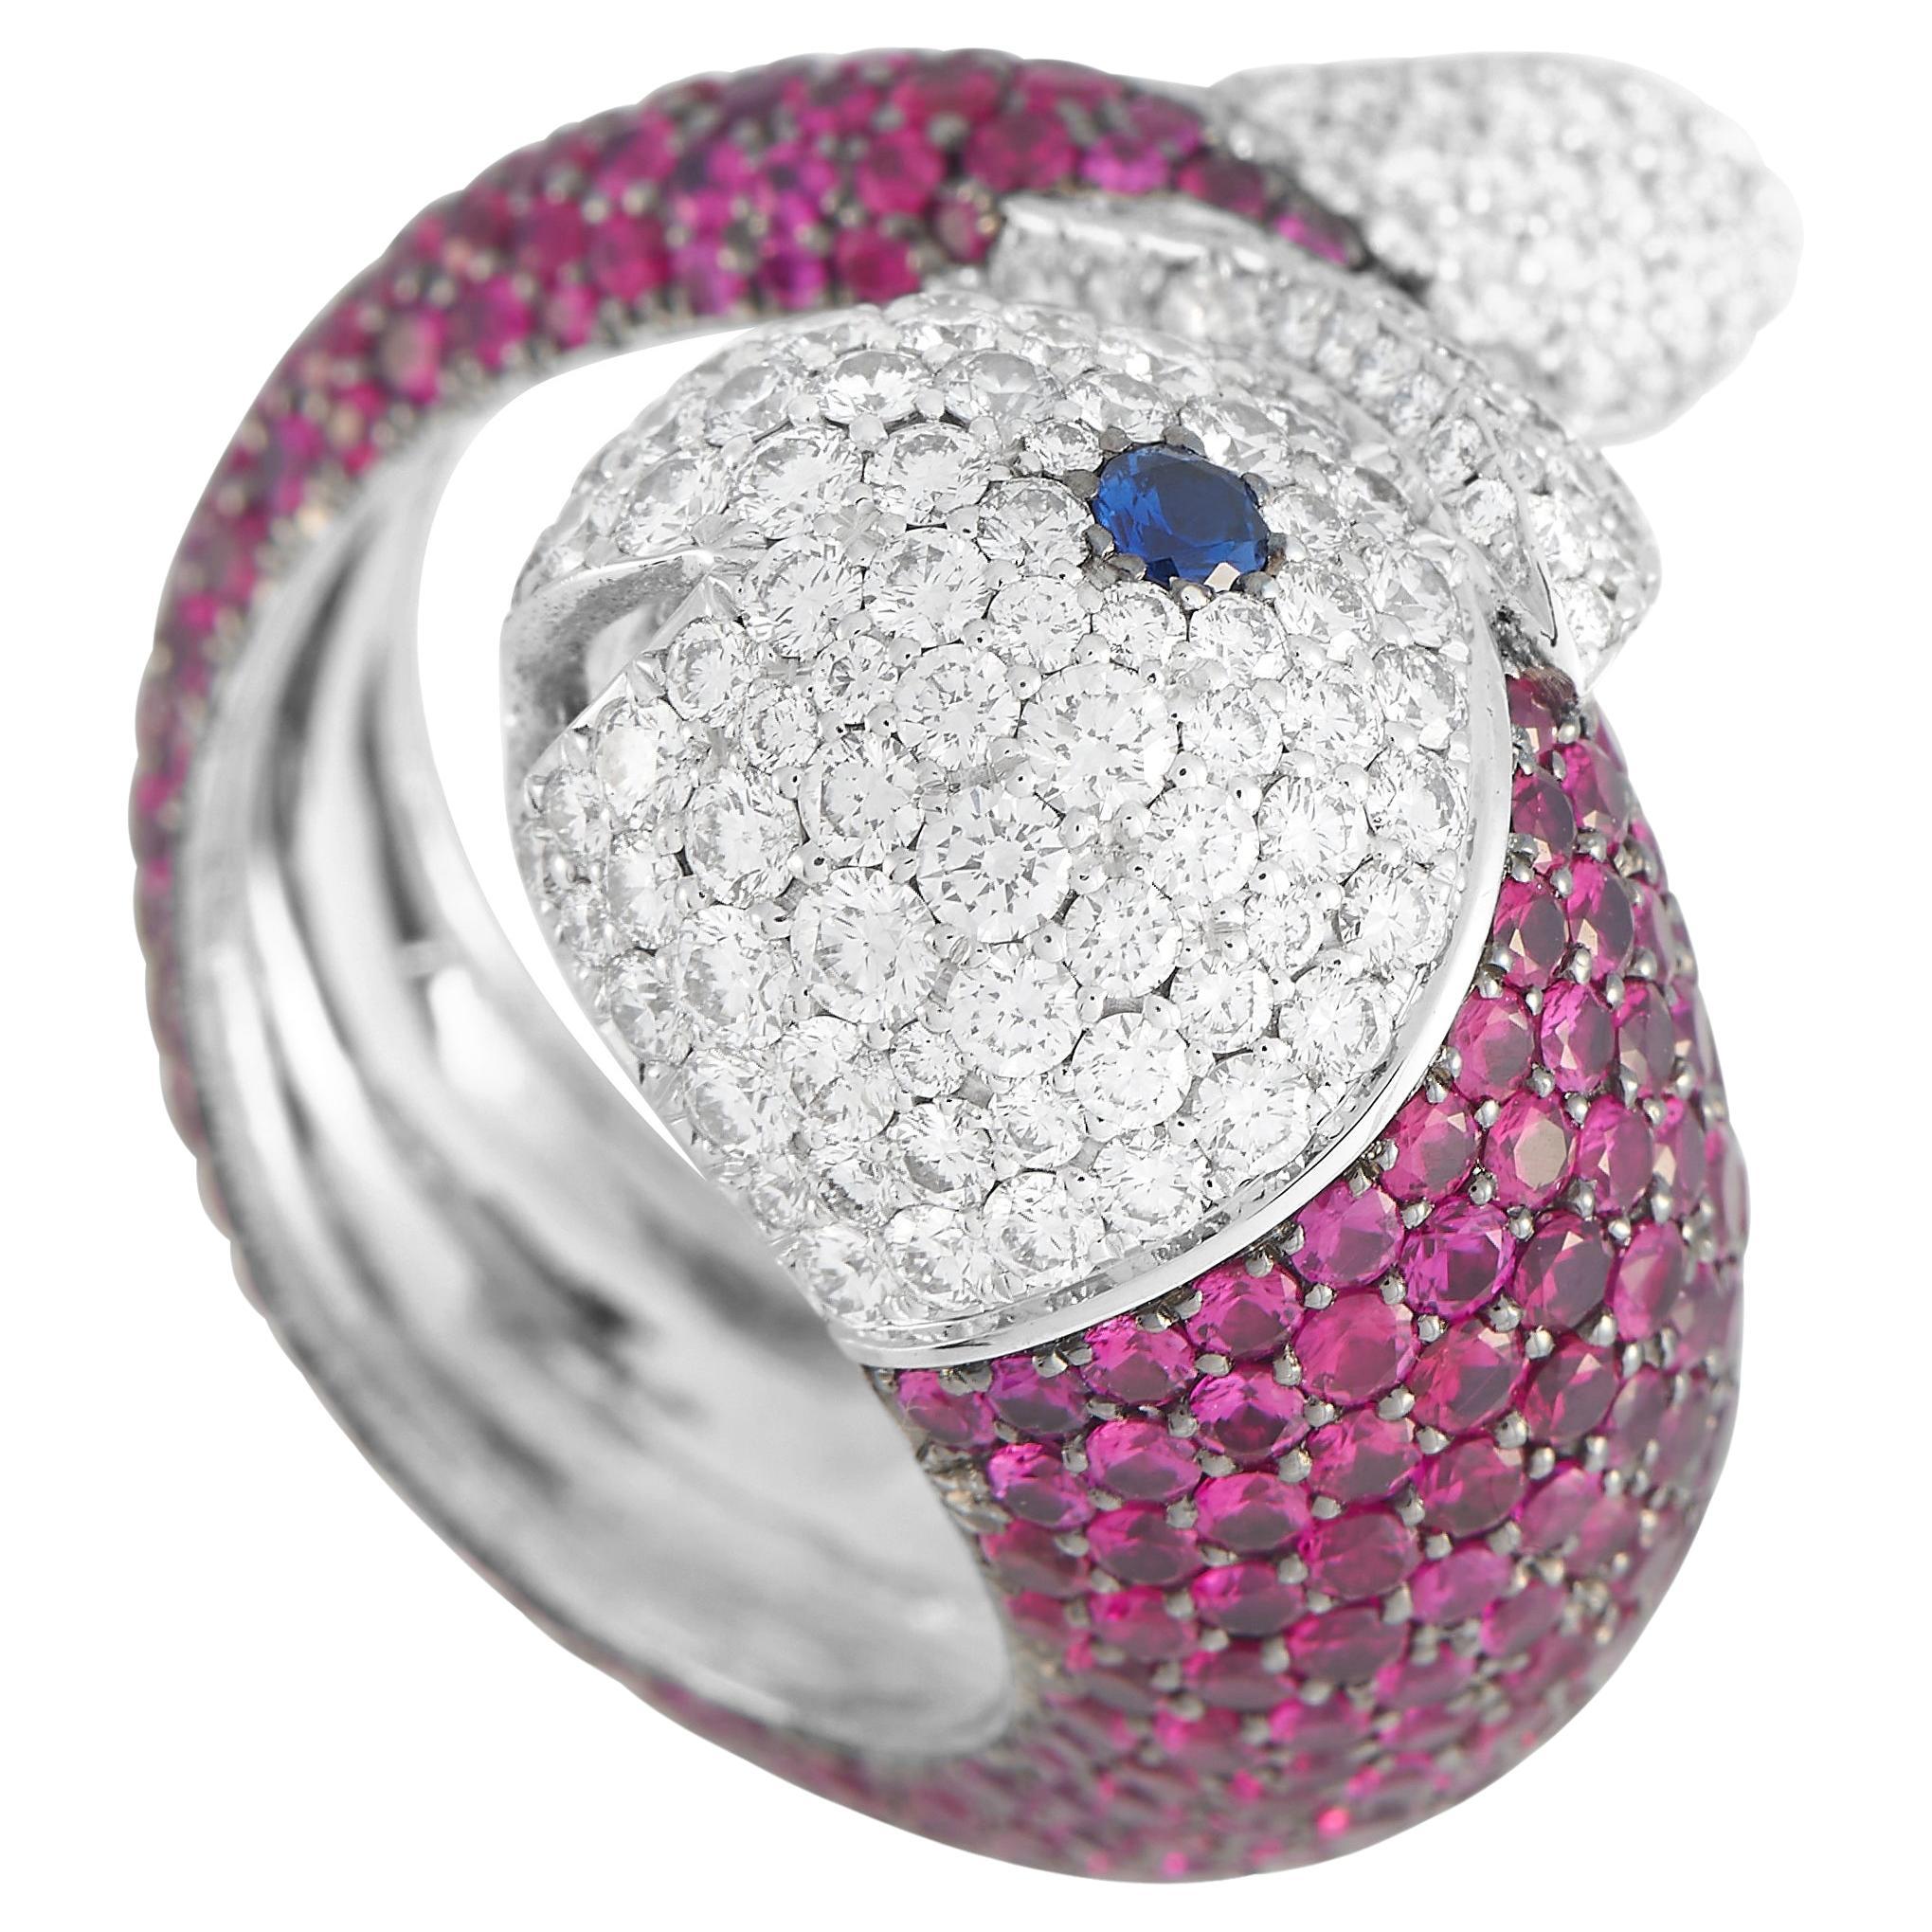 Chopard 18K White Gold 1.88 Ct Diamond, Ruby and Sapphire Fish Ring For Sale